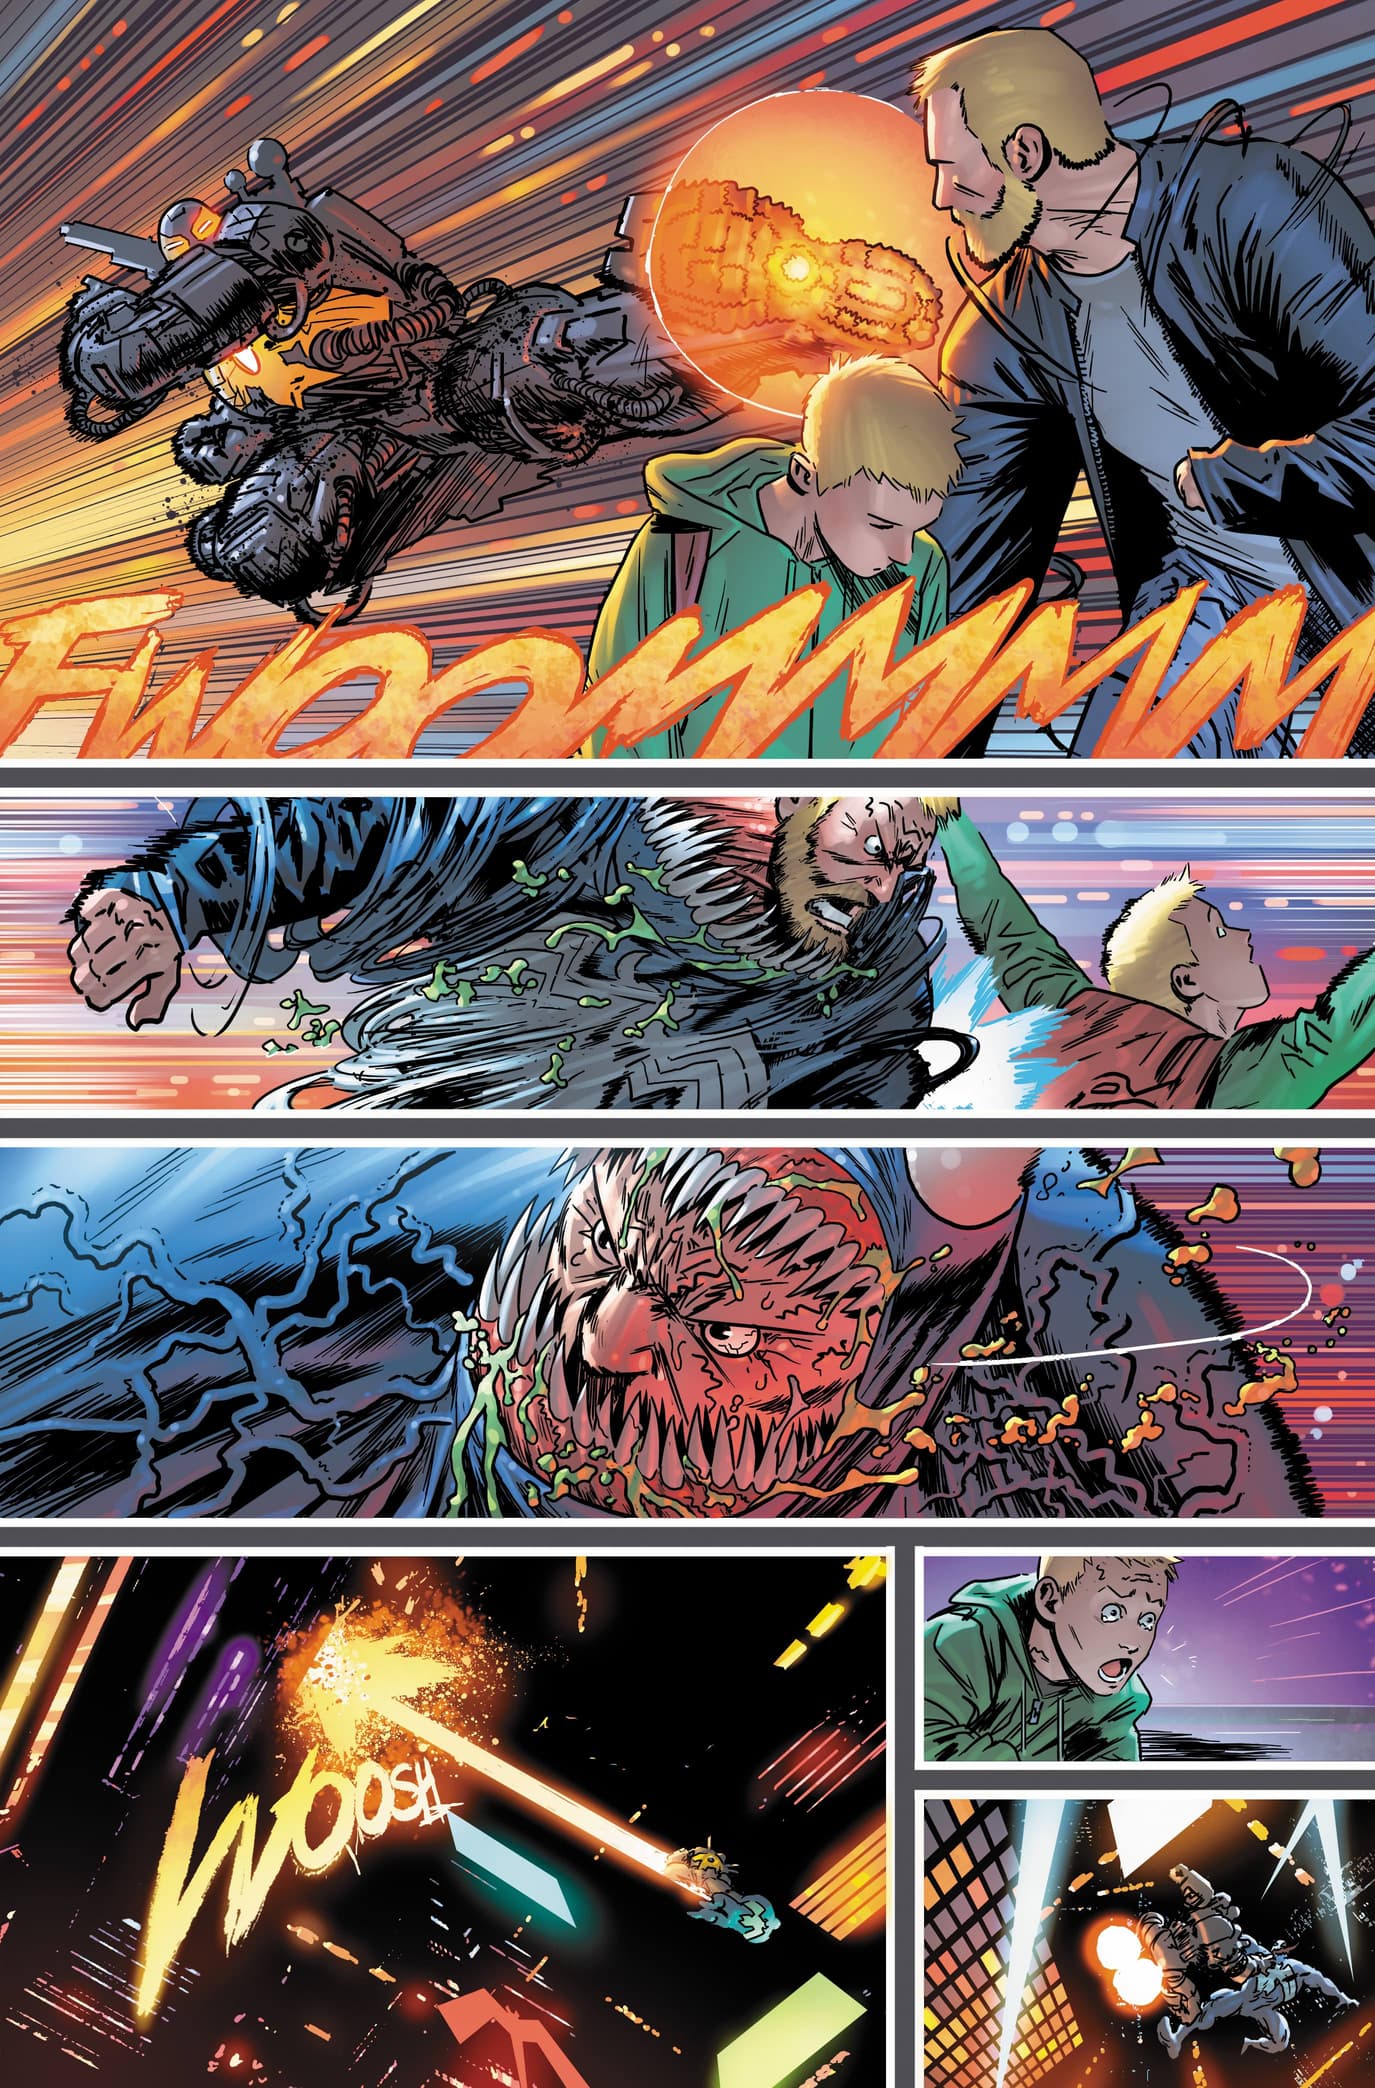 VENOM #27 preview interiors by Juan Gedeon with colors by Jesus Aburtov